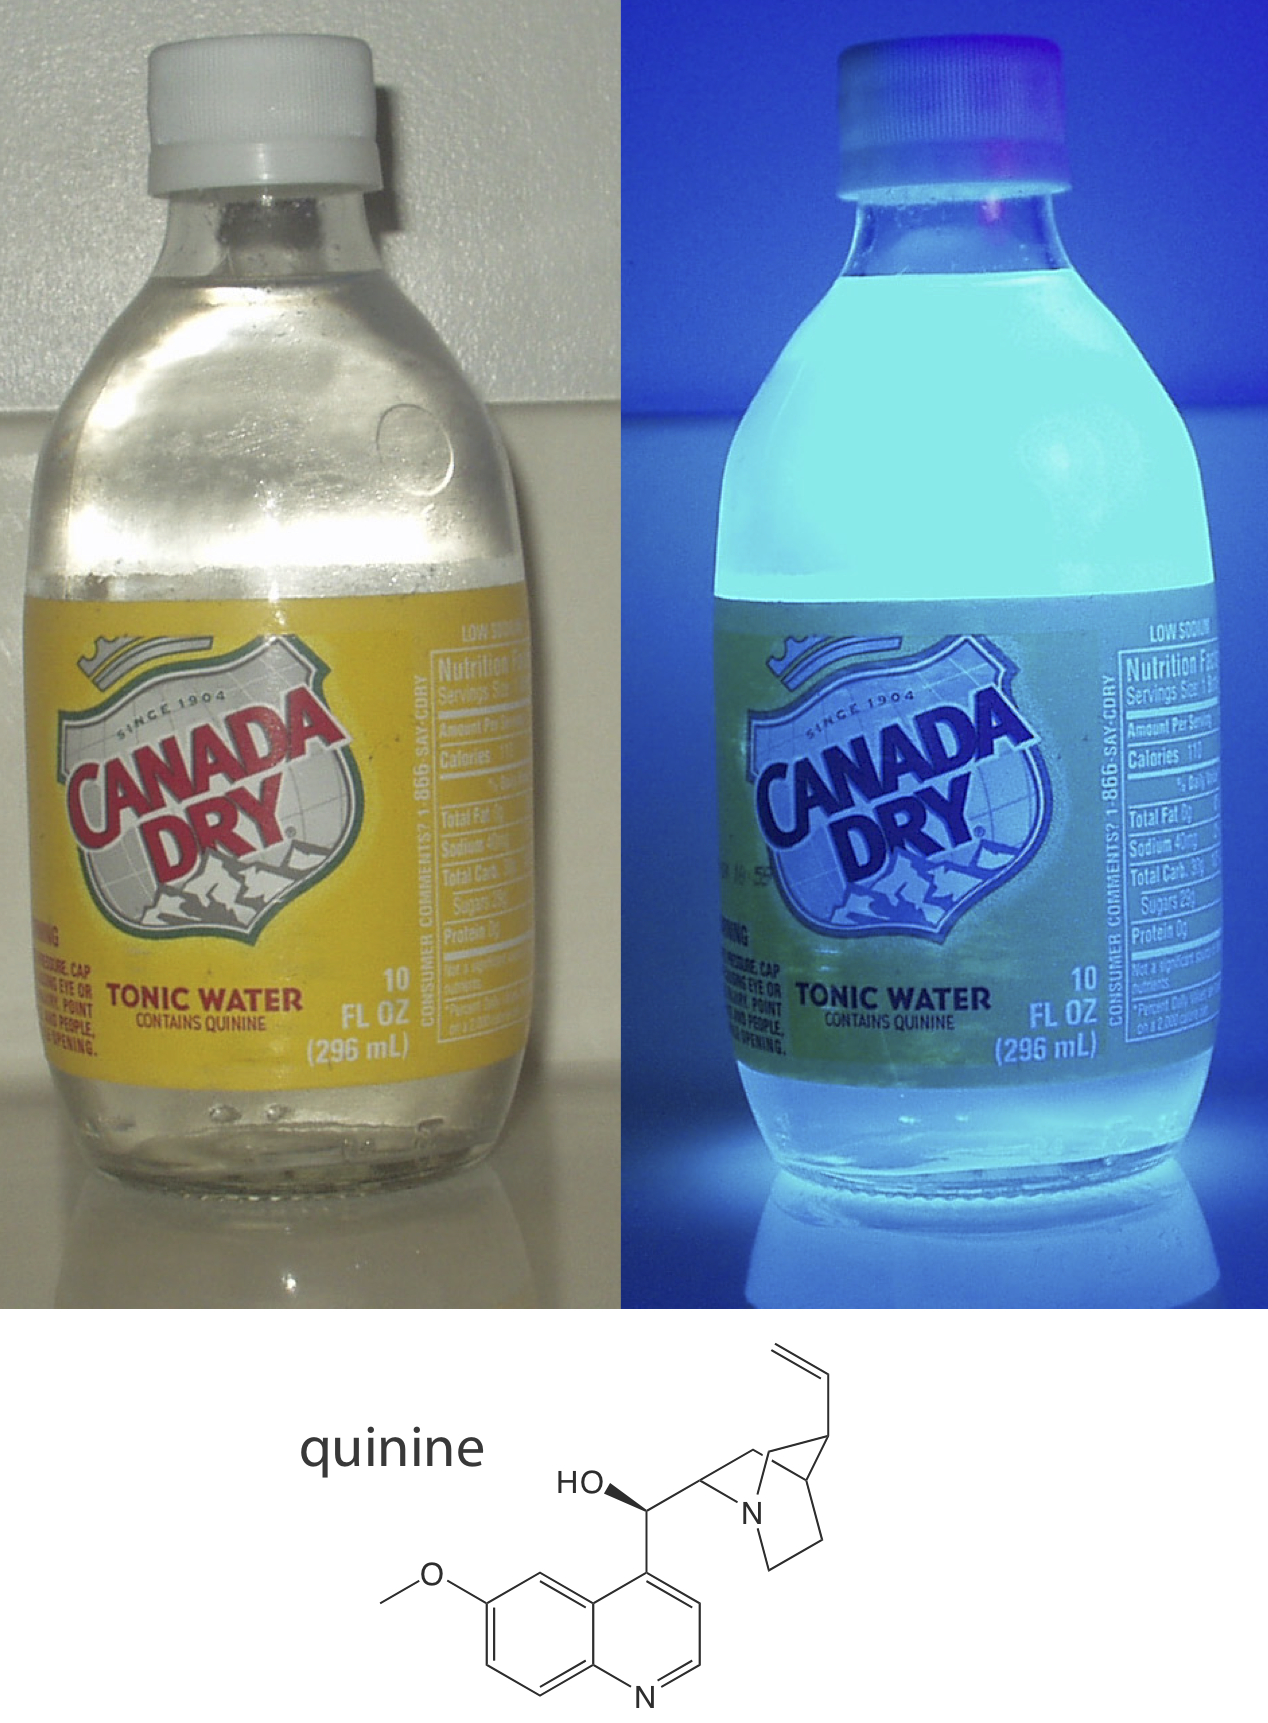 Tonic water, which contains quinine, is fluorescent when placed under a UV lamp.